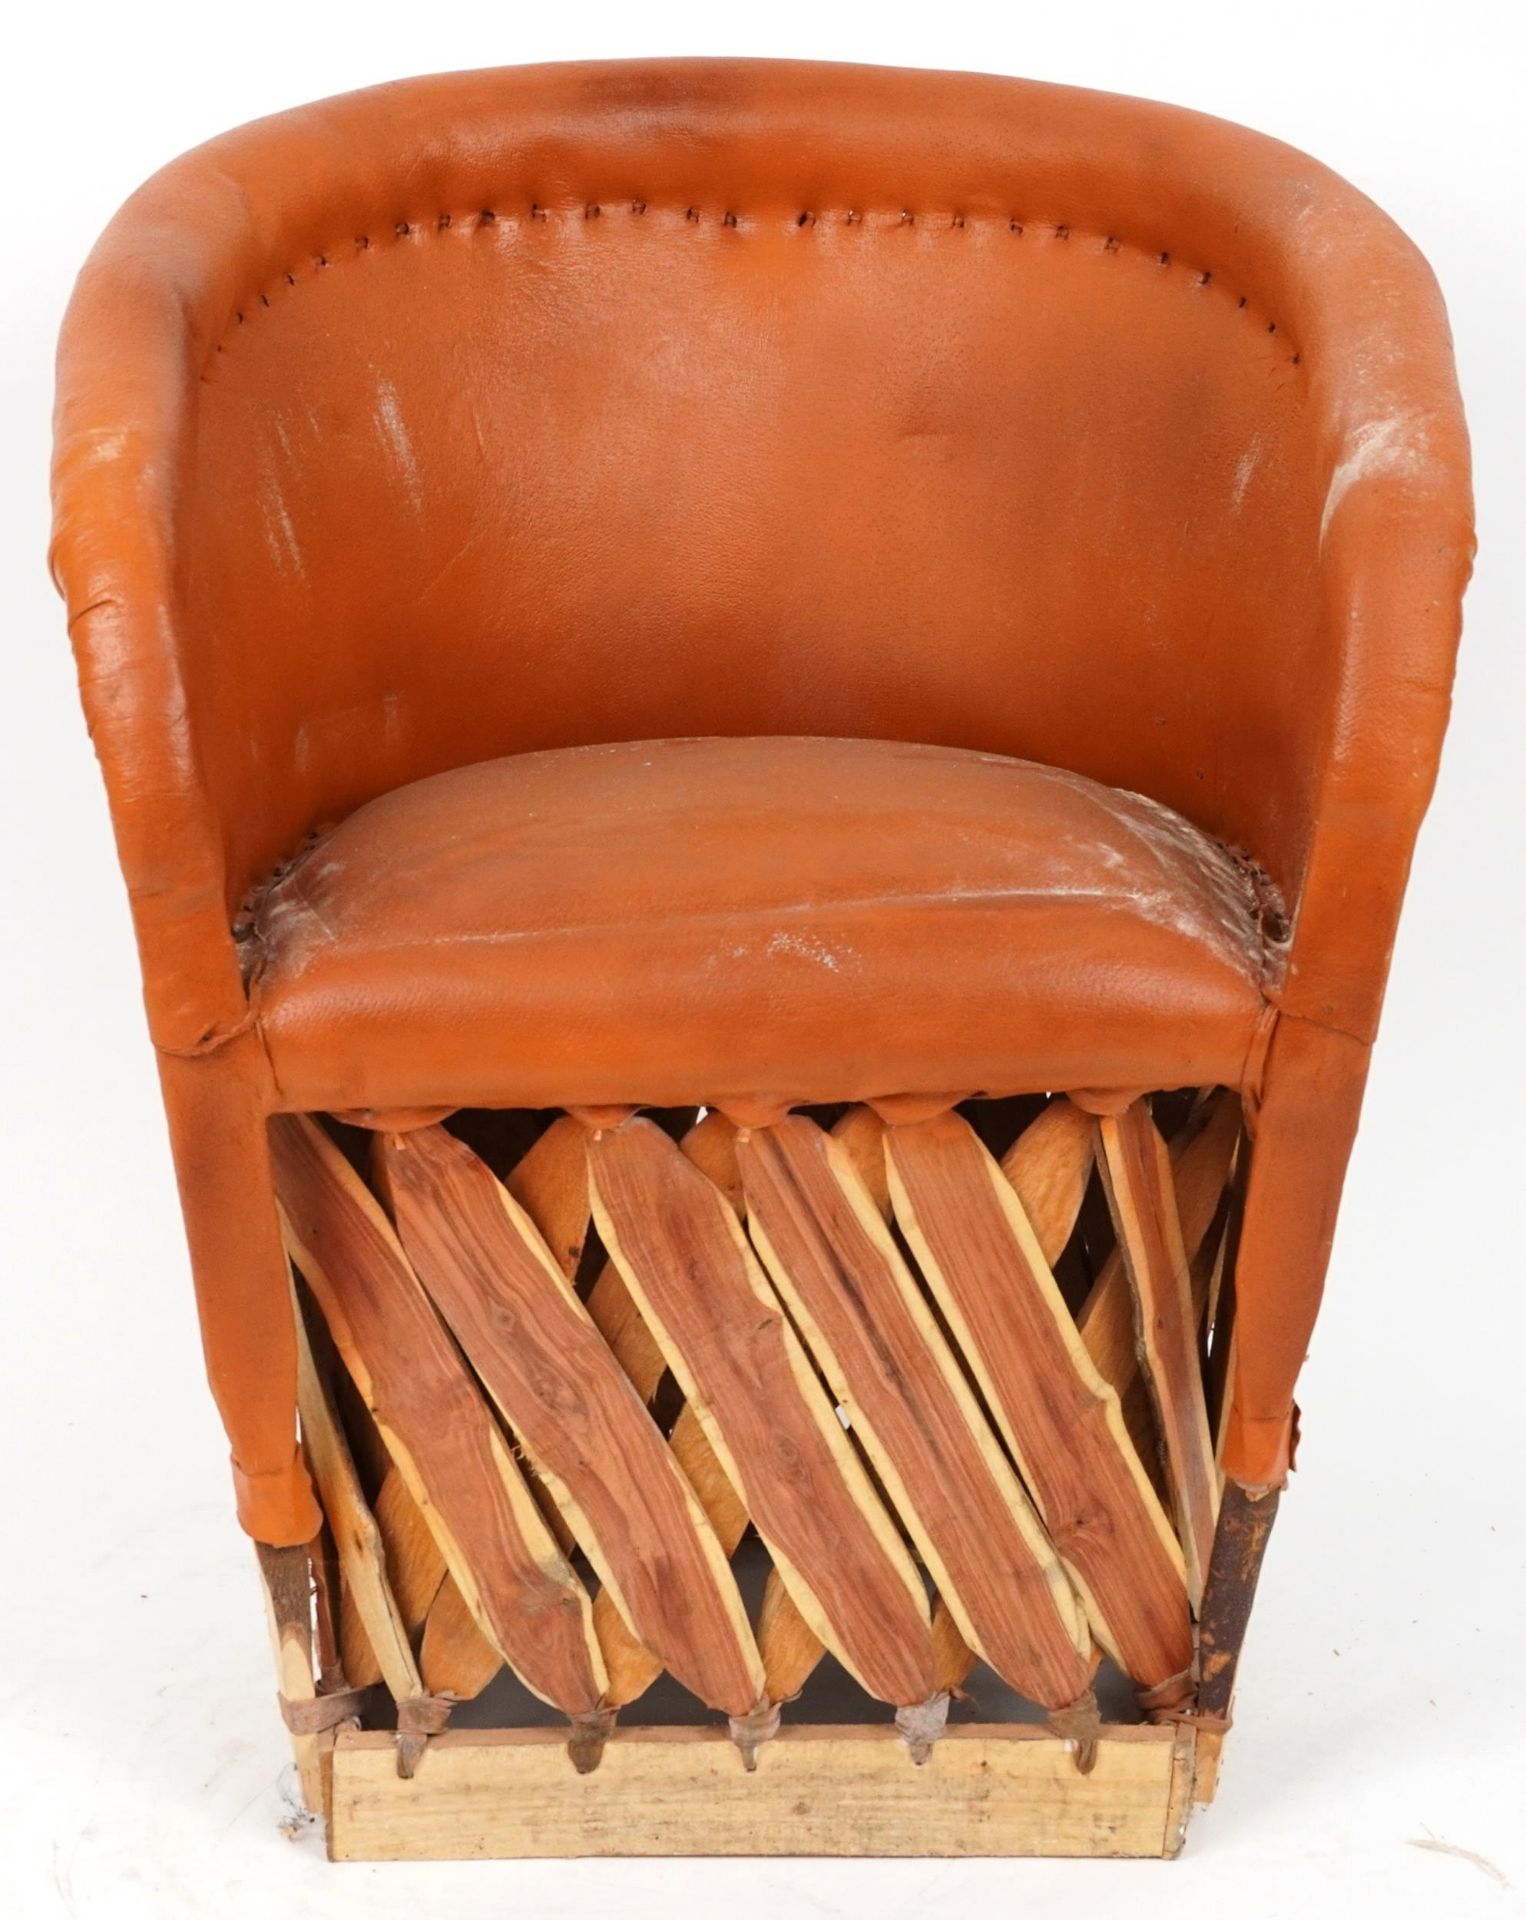 Equipale, Mexican mid century style pig skin and cedar strip chair with trellis frame, 78cm high : - Image 2 of 4